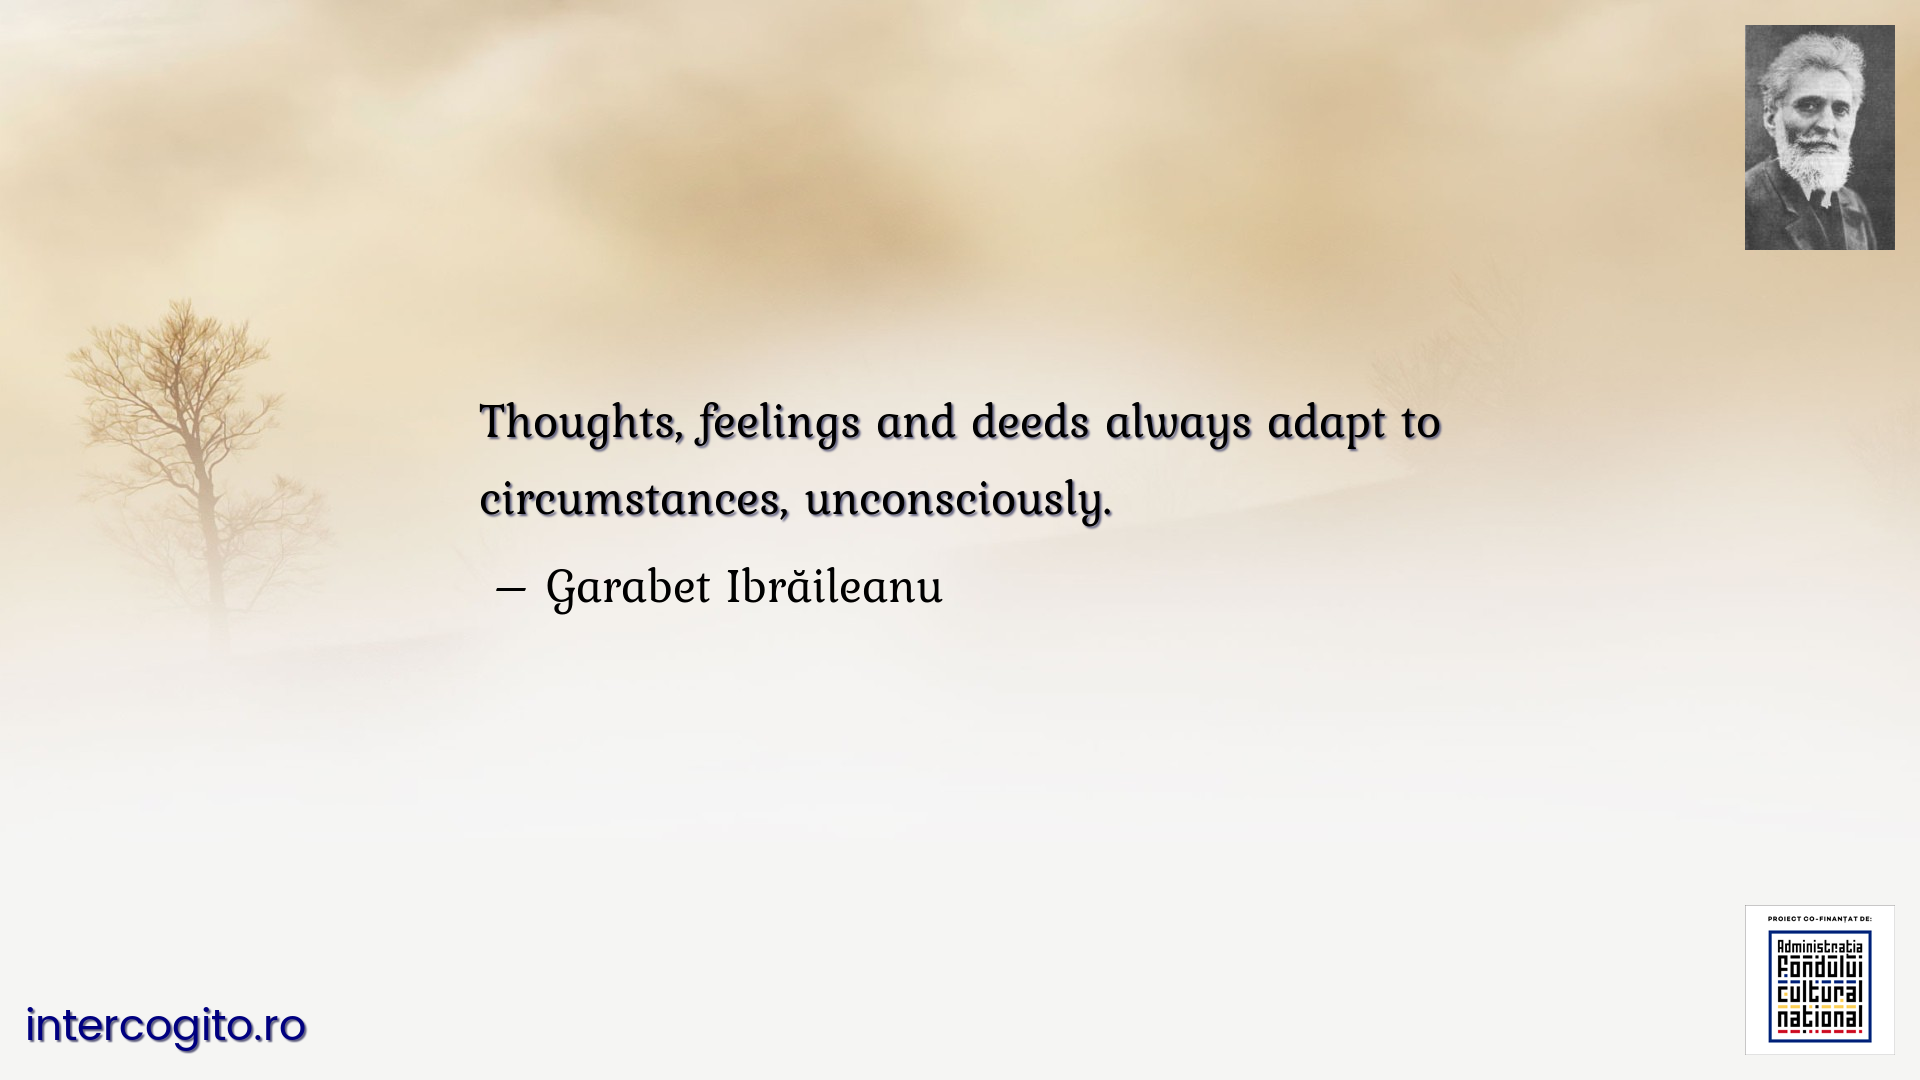 Thoughts, feelings and deeds always adapt to circumstances, unconsciously.